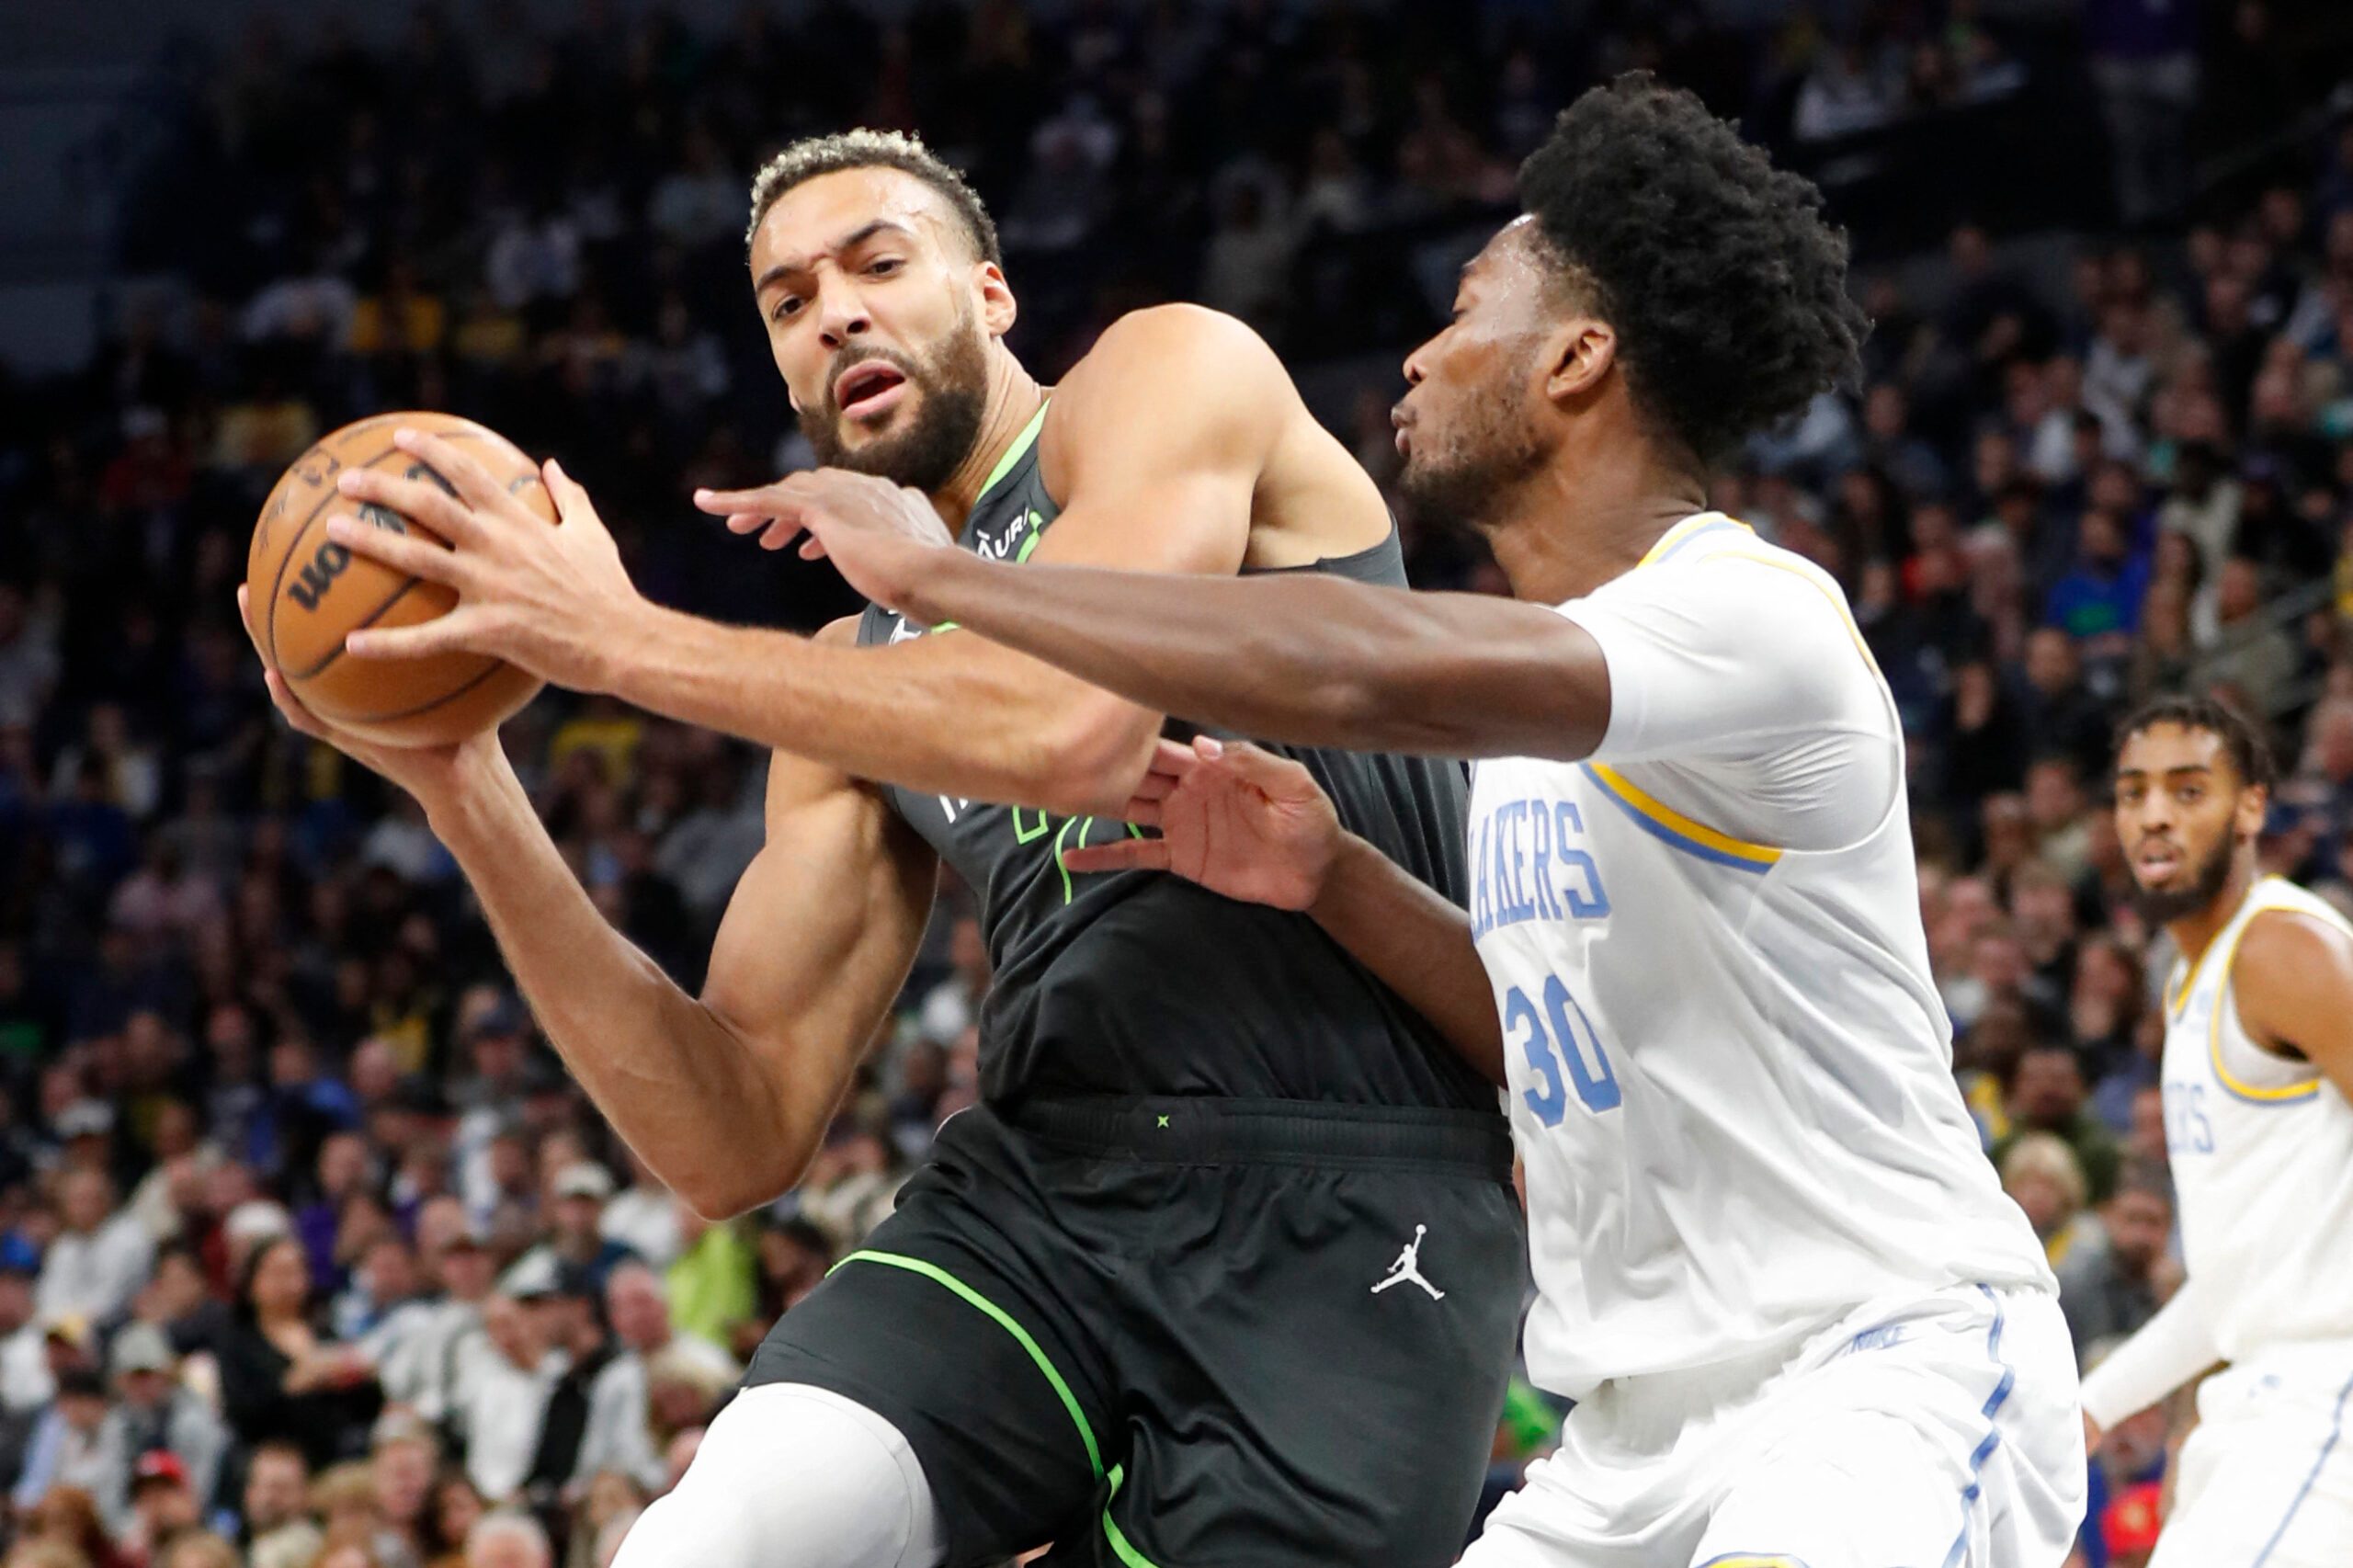 Gobert feasts with 20-20 game as Wolves kick Lakers down to 5th straight loss